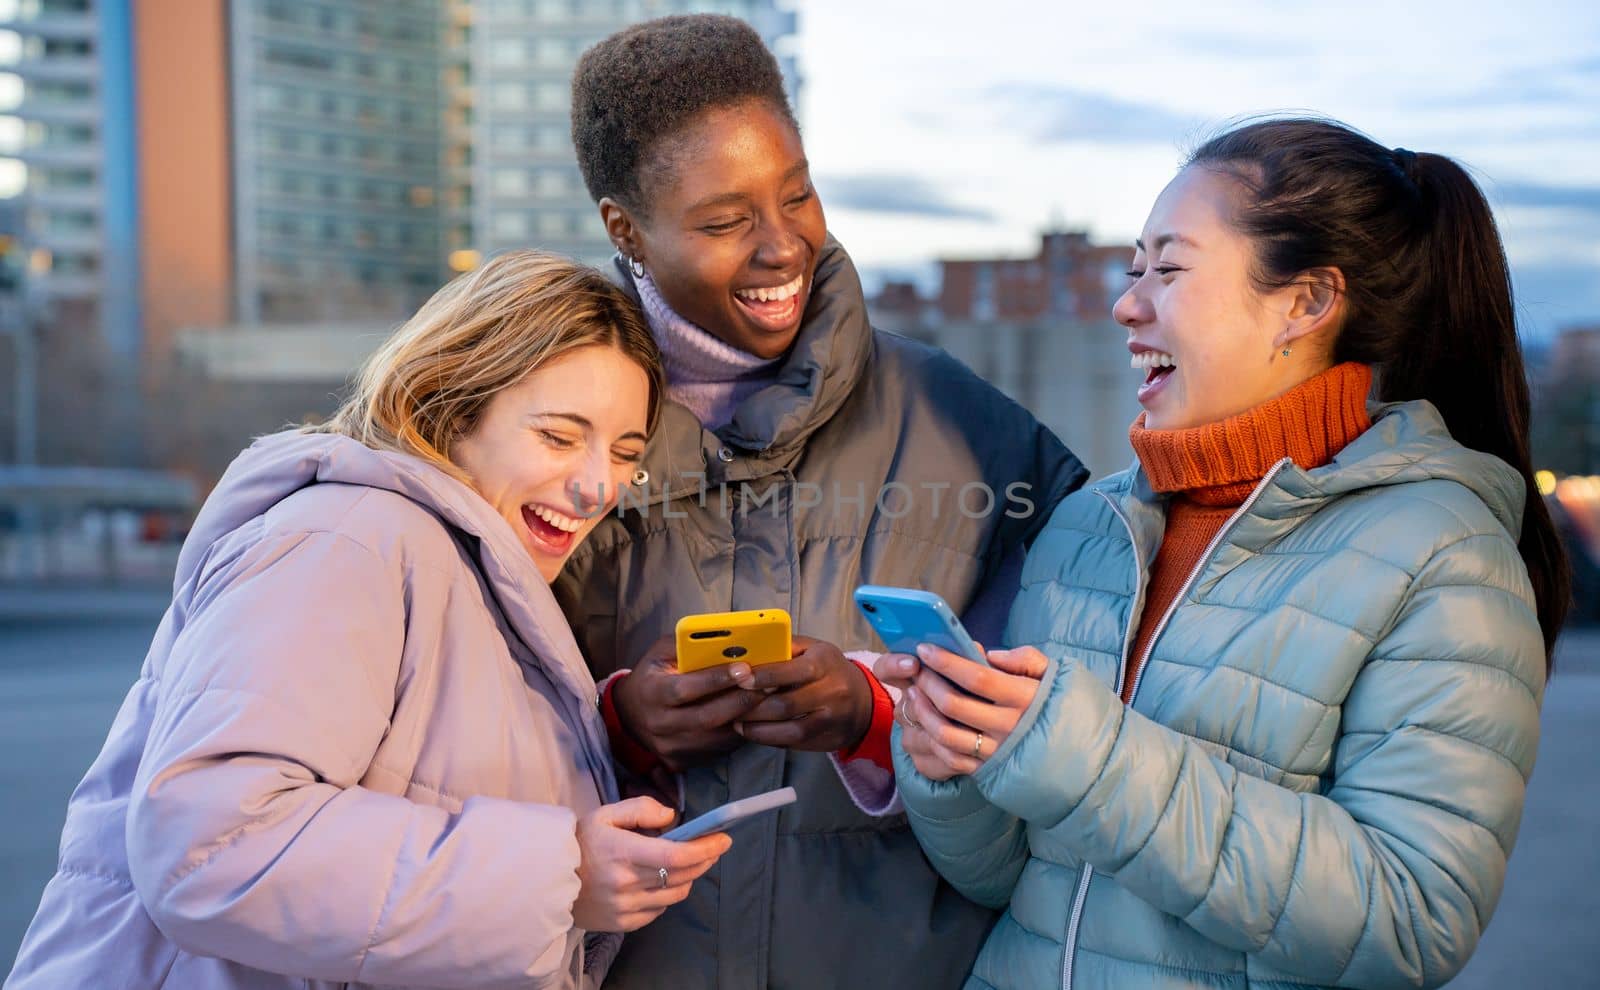 Cheerful female friends using cell phones and laughing in the city. Technology addicted millennial community concept. Social Media communication generation Z. High quality photo